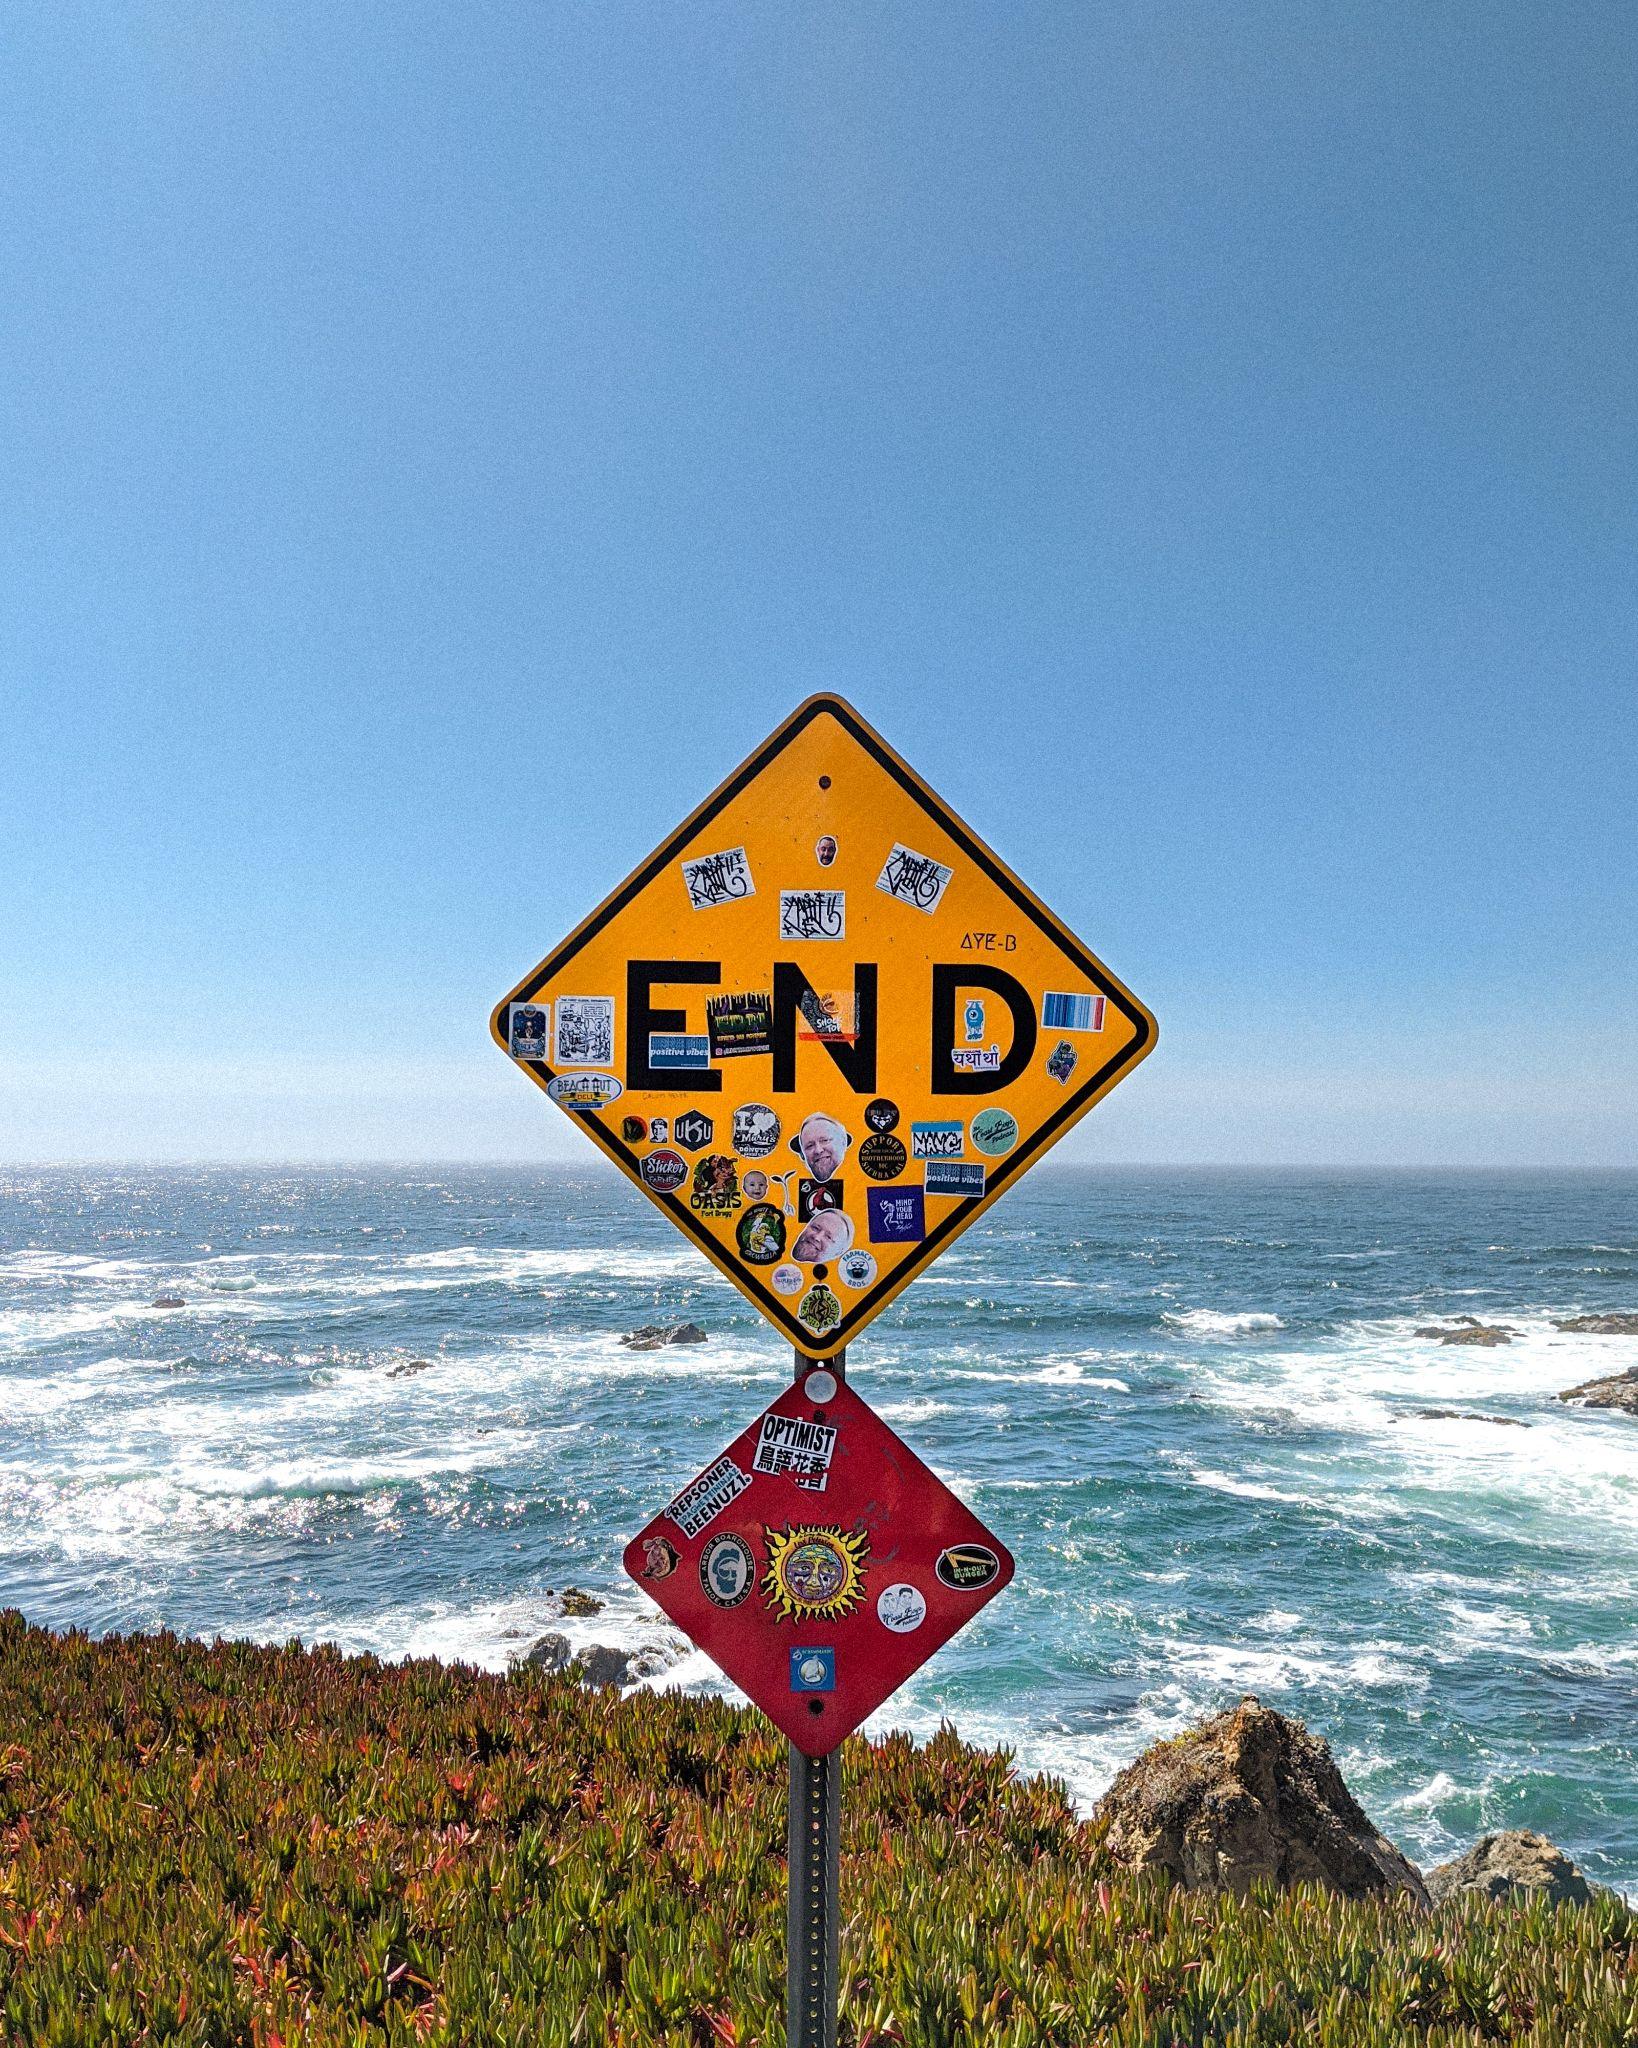 SIgn that says "End"